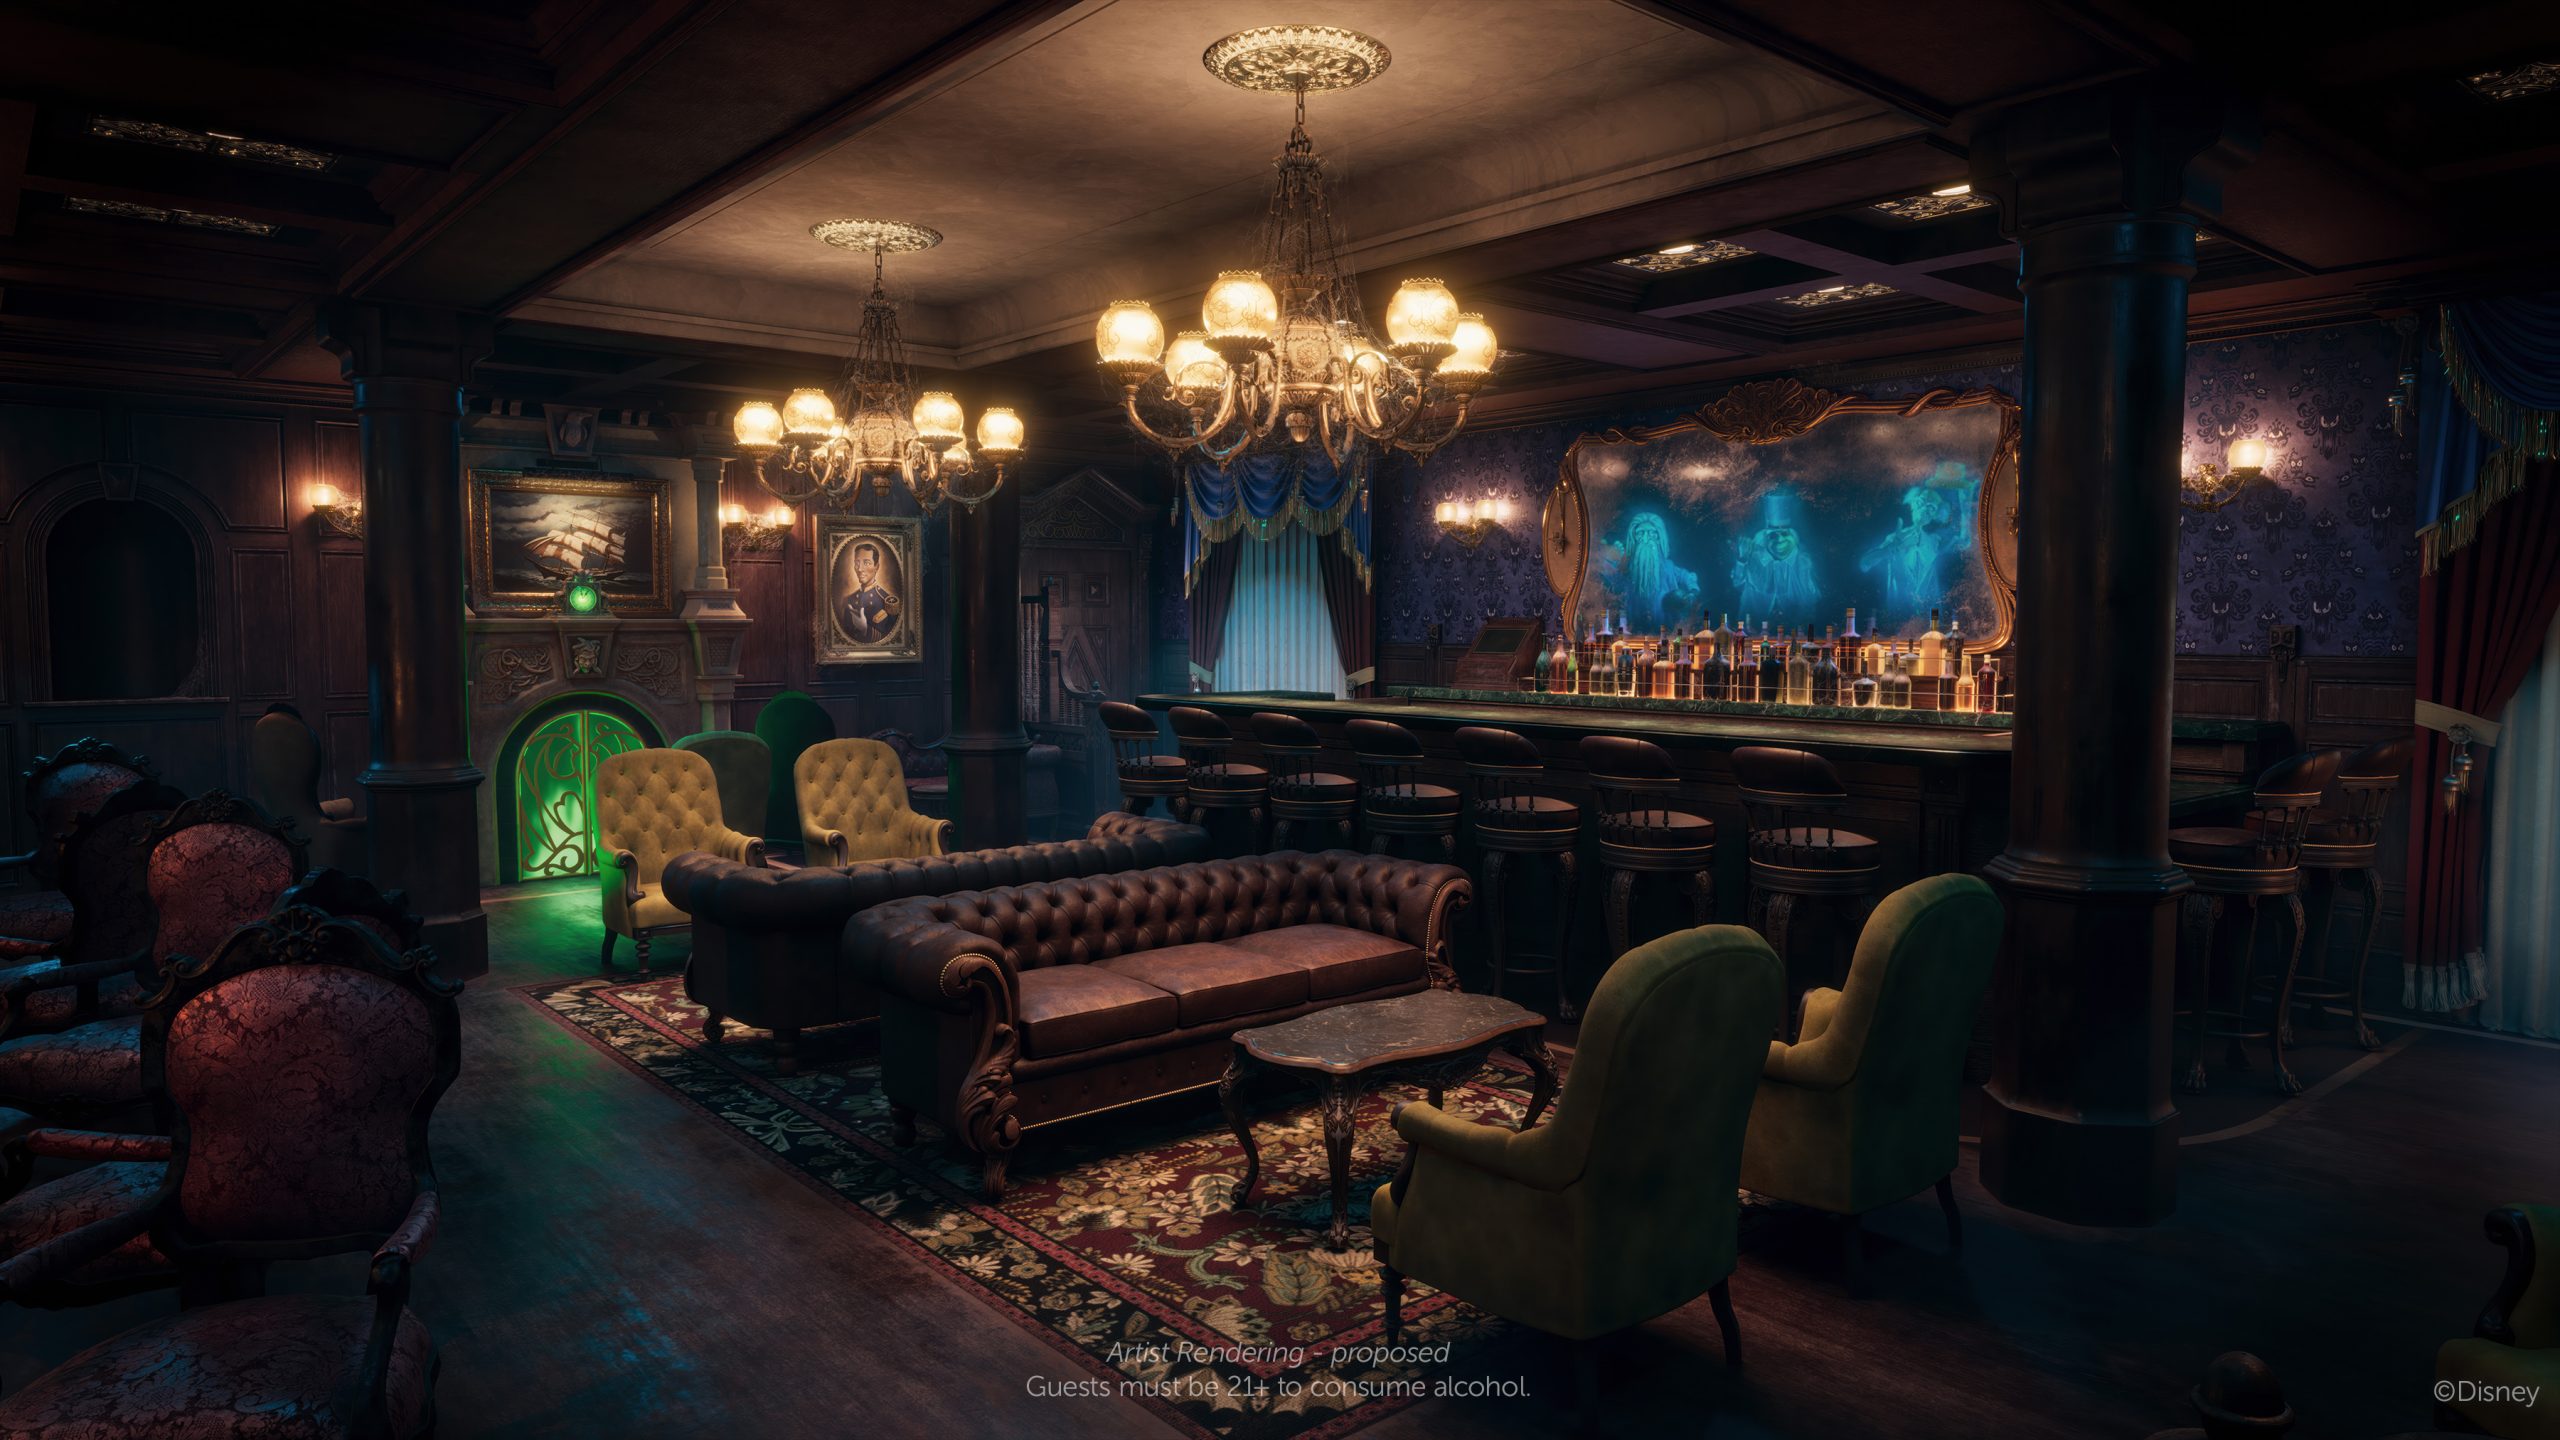 Is Disney Keeping a SECRET About a Haunted Mansion Bar on the NEW Destiny Cruise Ship?